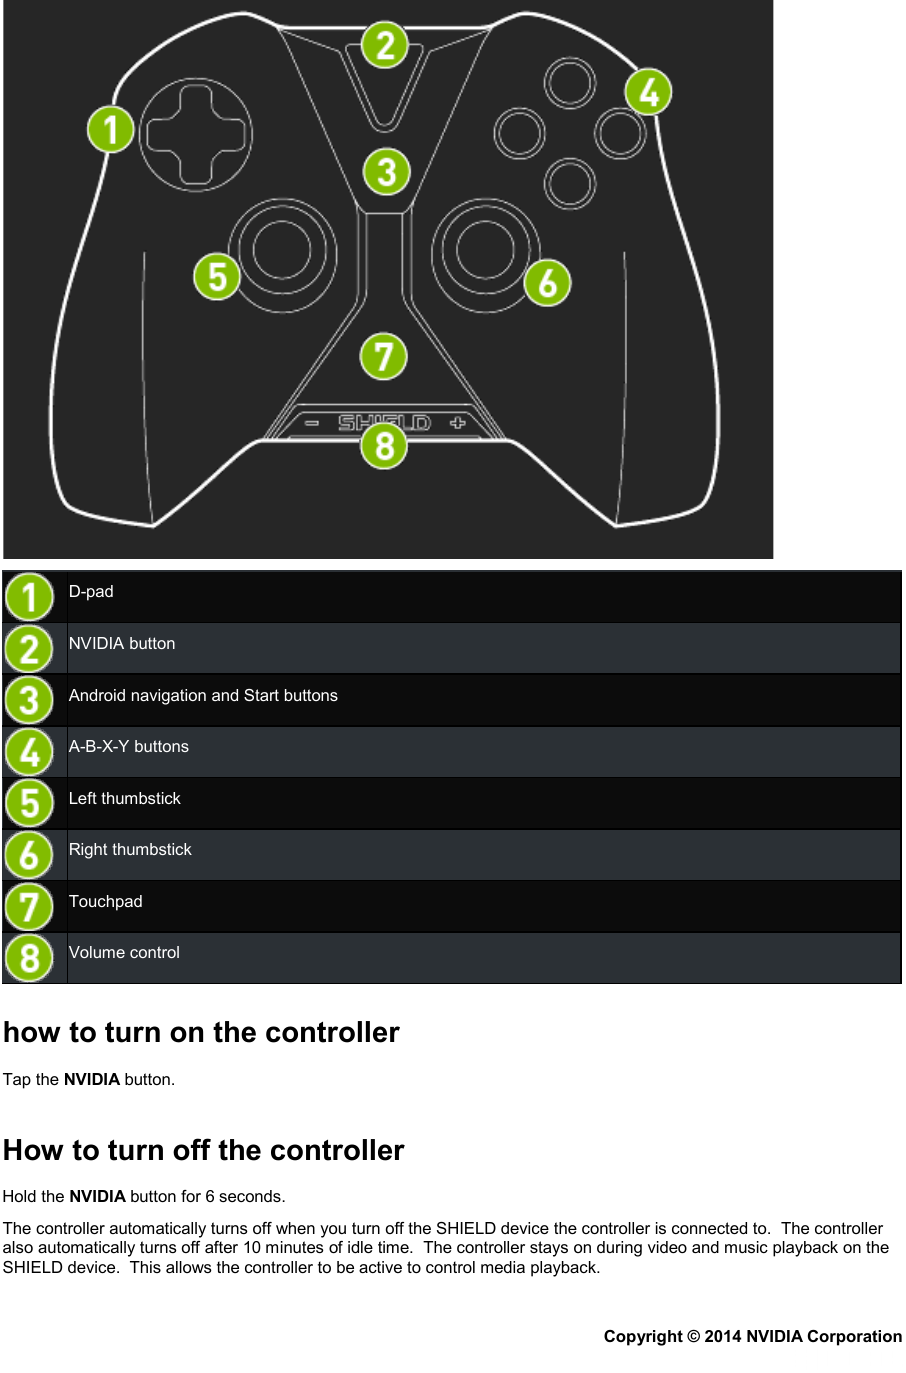   D-pad  NVIDIA button  Android navigation and Start buttons  A-B-X-Y buttons  Left thumbstick  Right thumbstick  Touchpad  Volume control   how to turn on the controller Tap the NVIDIA button.   How to turn off the controller Hold the NVIDIA button for 6 seconds. The controller automatically turns off when you turn off the SHIELD device the controller is connected to.  The controller also automatically turns off after 10 minutes of idle time.  The controller stays on during video and music playback on the SHIELD device.  This allows the controller to be active to control media playback. Copyright © 2014 NVIDIA Corporation   